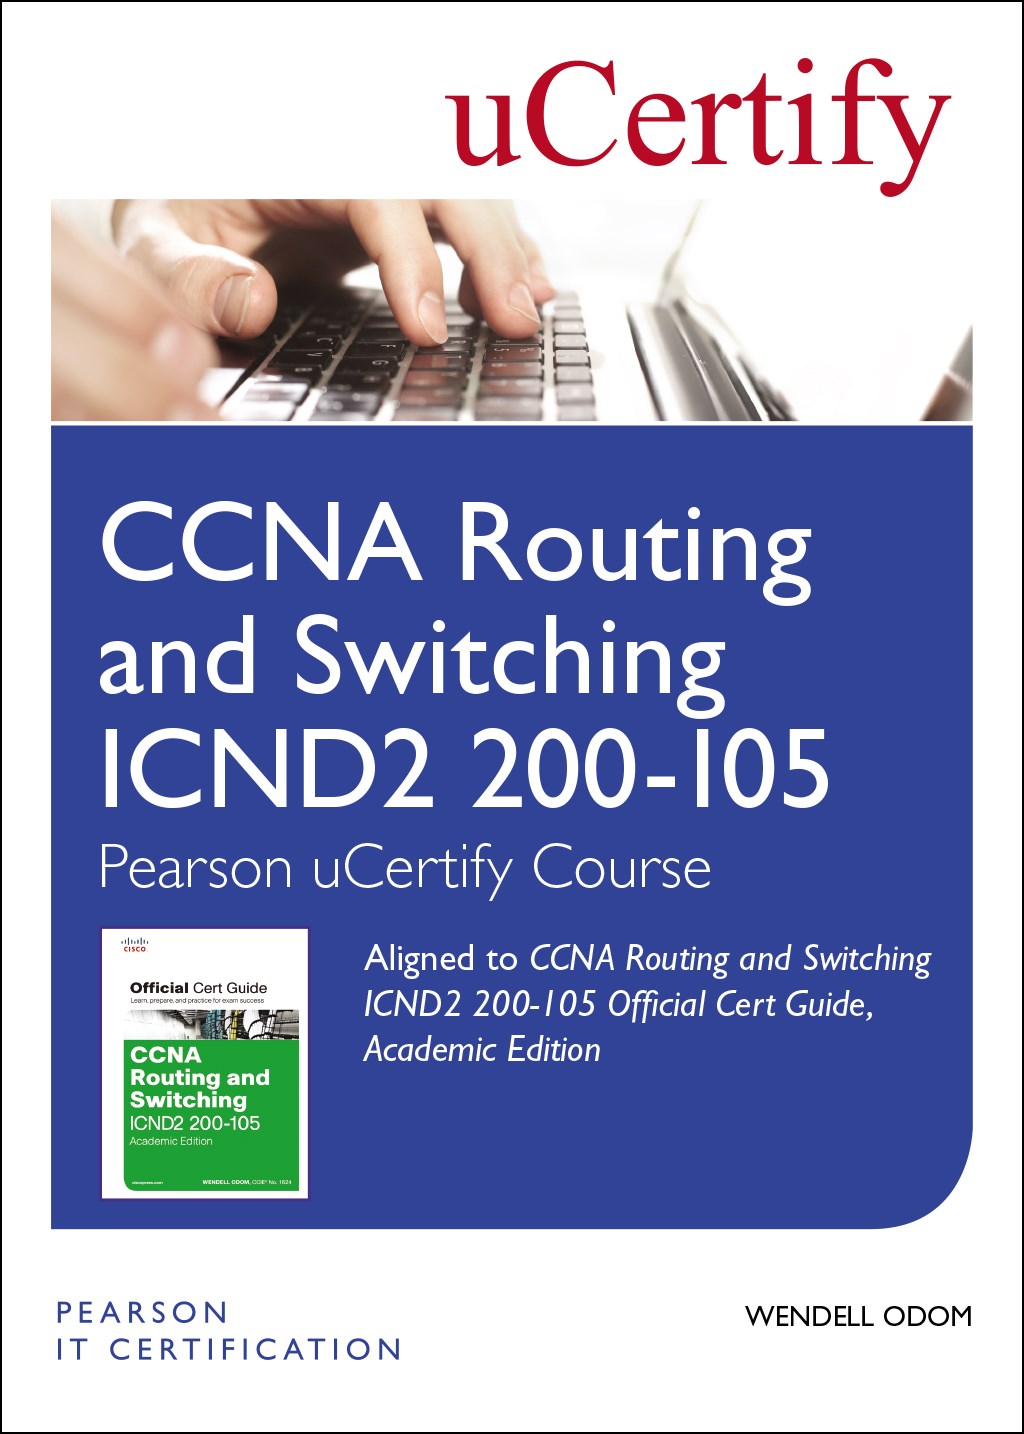 CCNA Routing and Switching ICND2 200-105 Official Cert Guide, Academic Edition Pearson uCertify Course Student Access Card